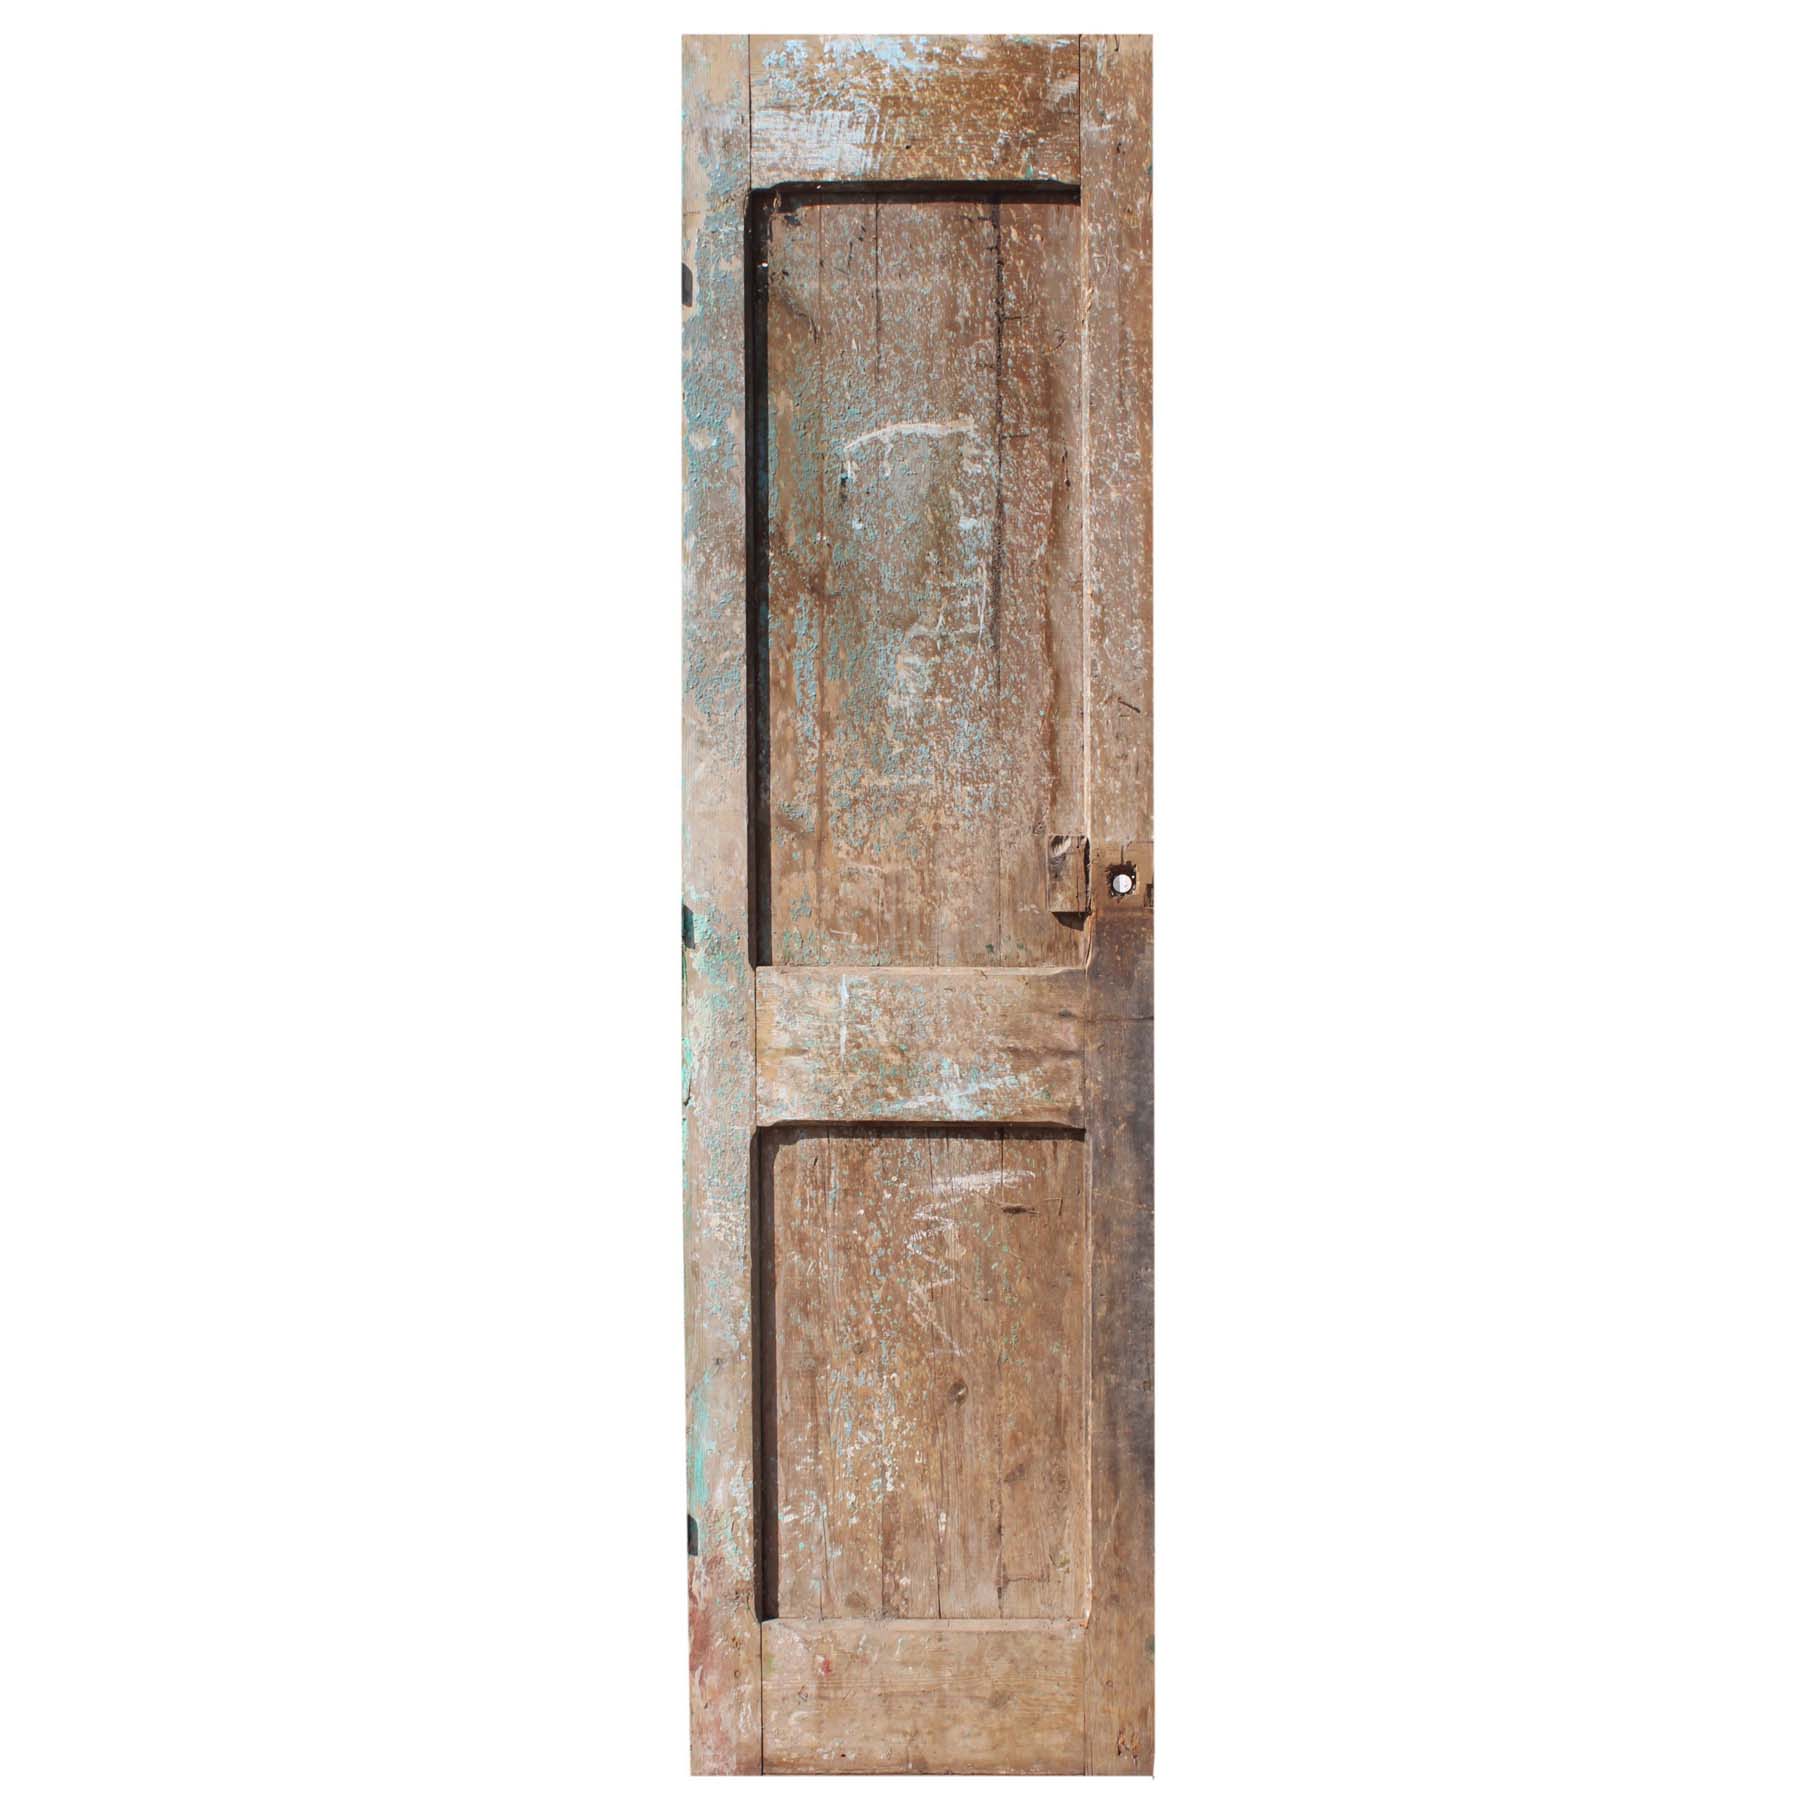 Reclaimed 26” Door with Carved Details-69224